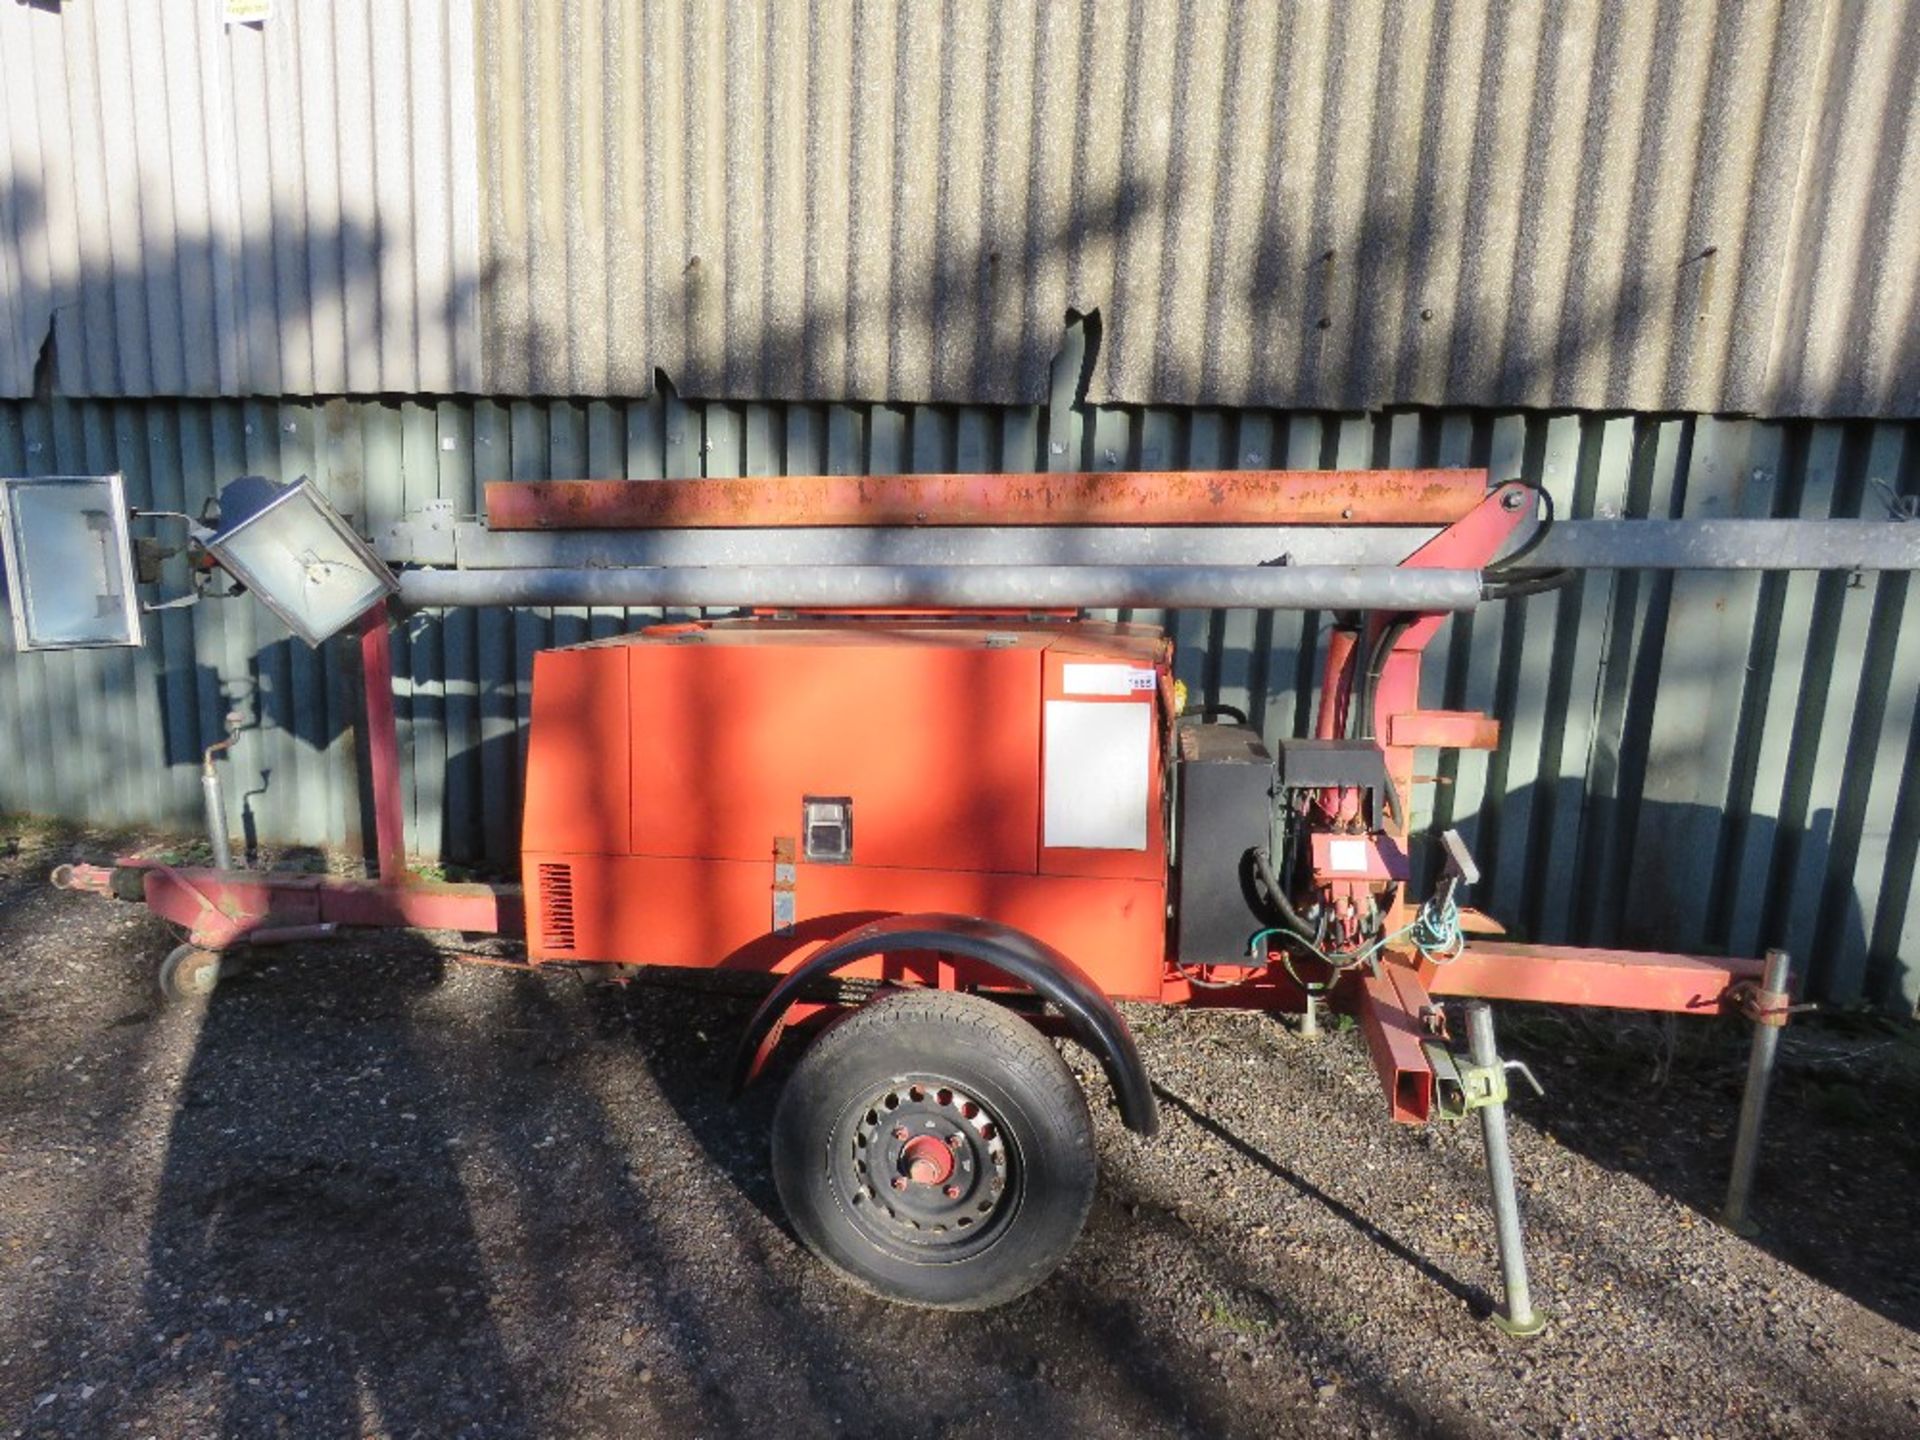 KUBOTA ENGINED TOWED LIGHTING TOWER. WHEN TESTED WAS SEEN TO RUN AND MAKE POWER. THIS LOT IS SOLD